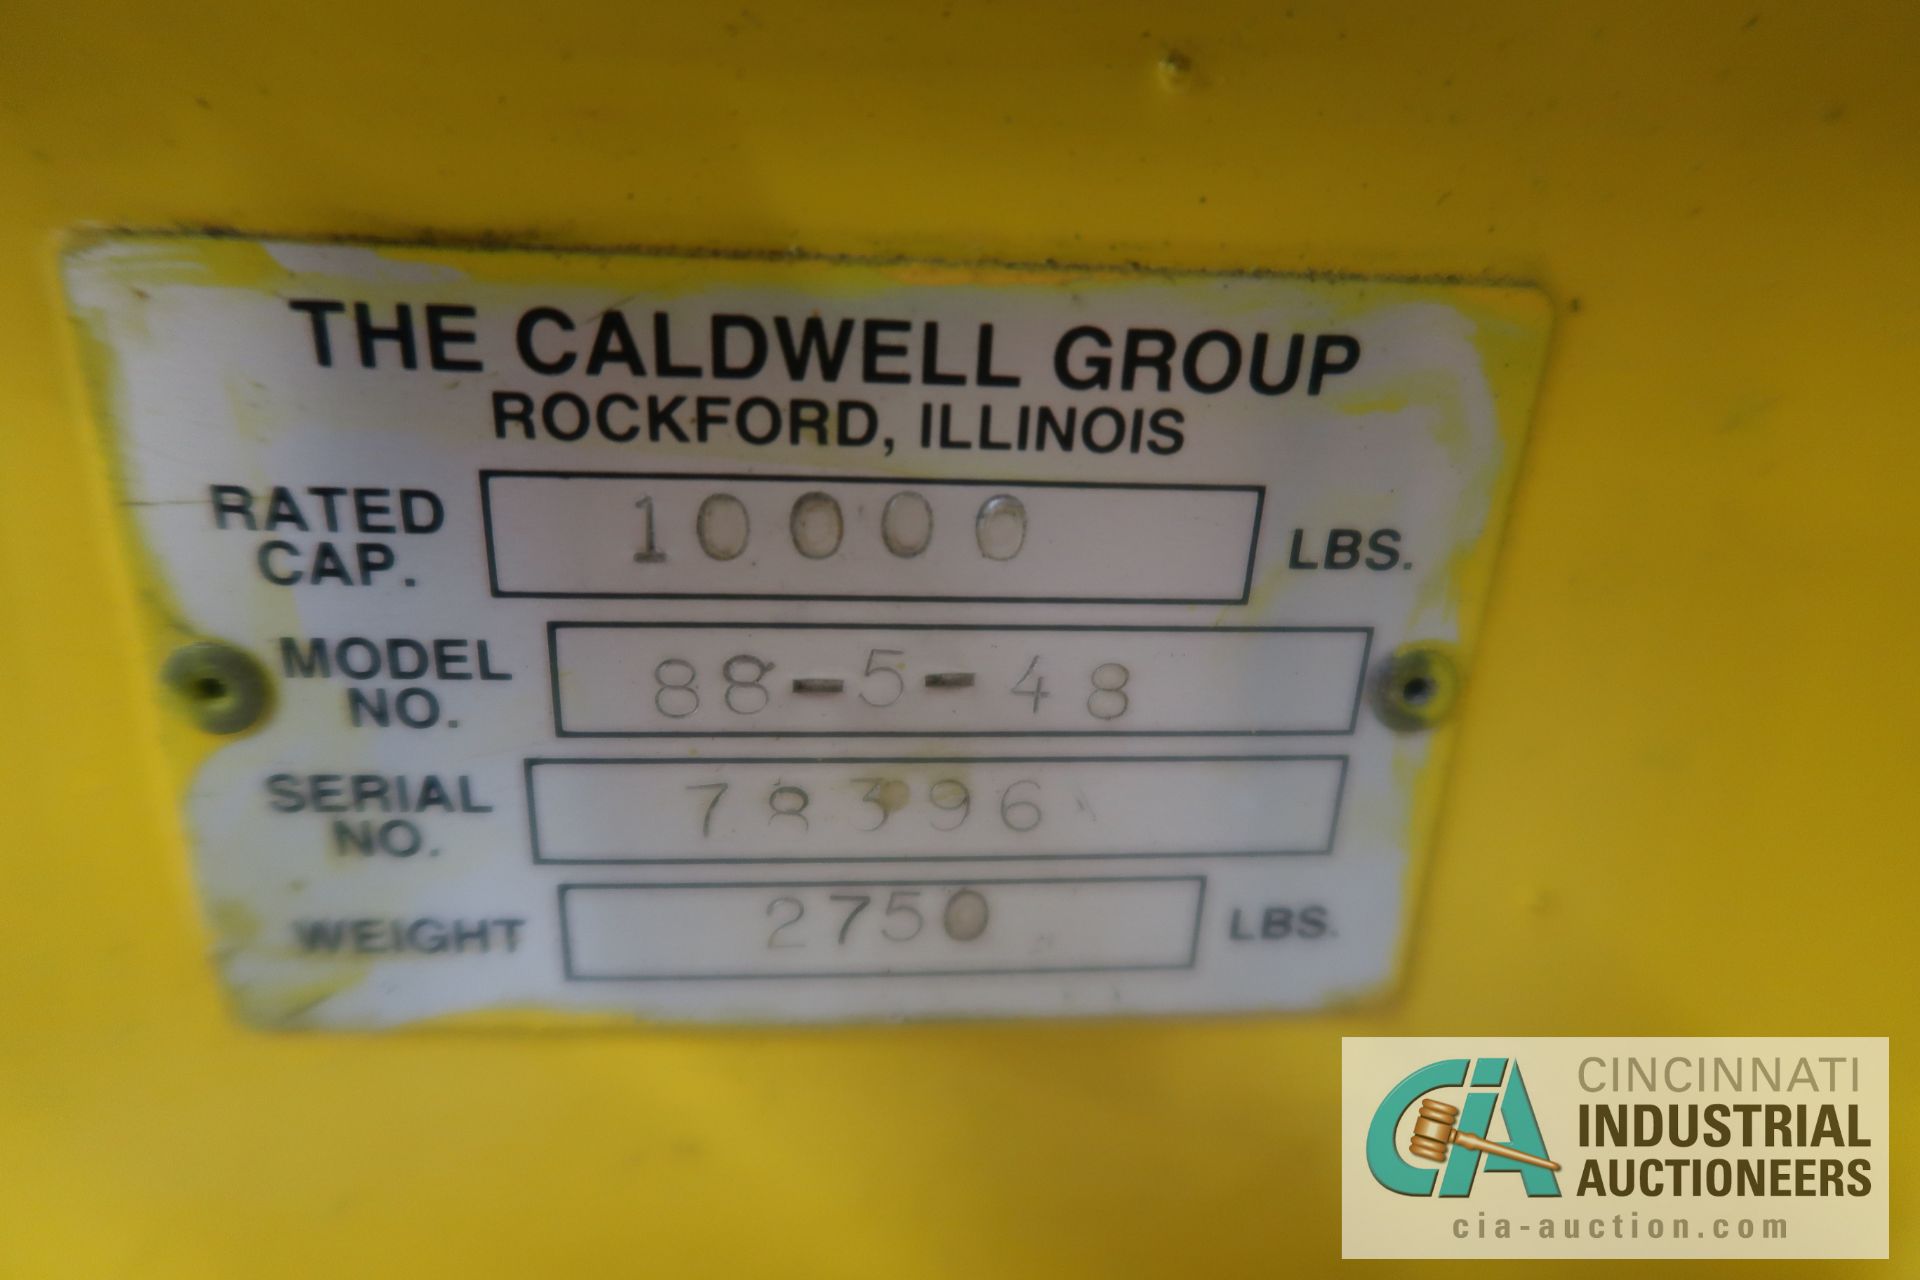 10,000 LB. CAPACITY CALDWELL MODEL 88-5-48 COIL UPENDER; S/N 78396 - Image 7 of 7